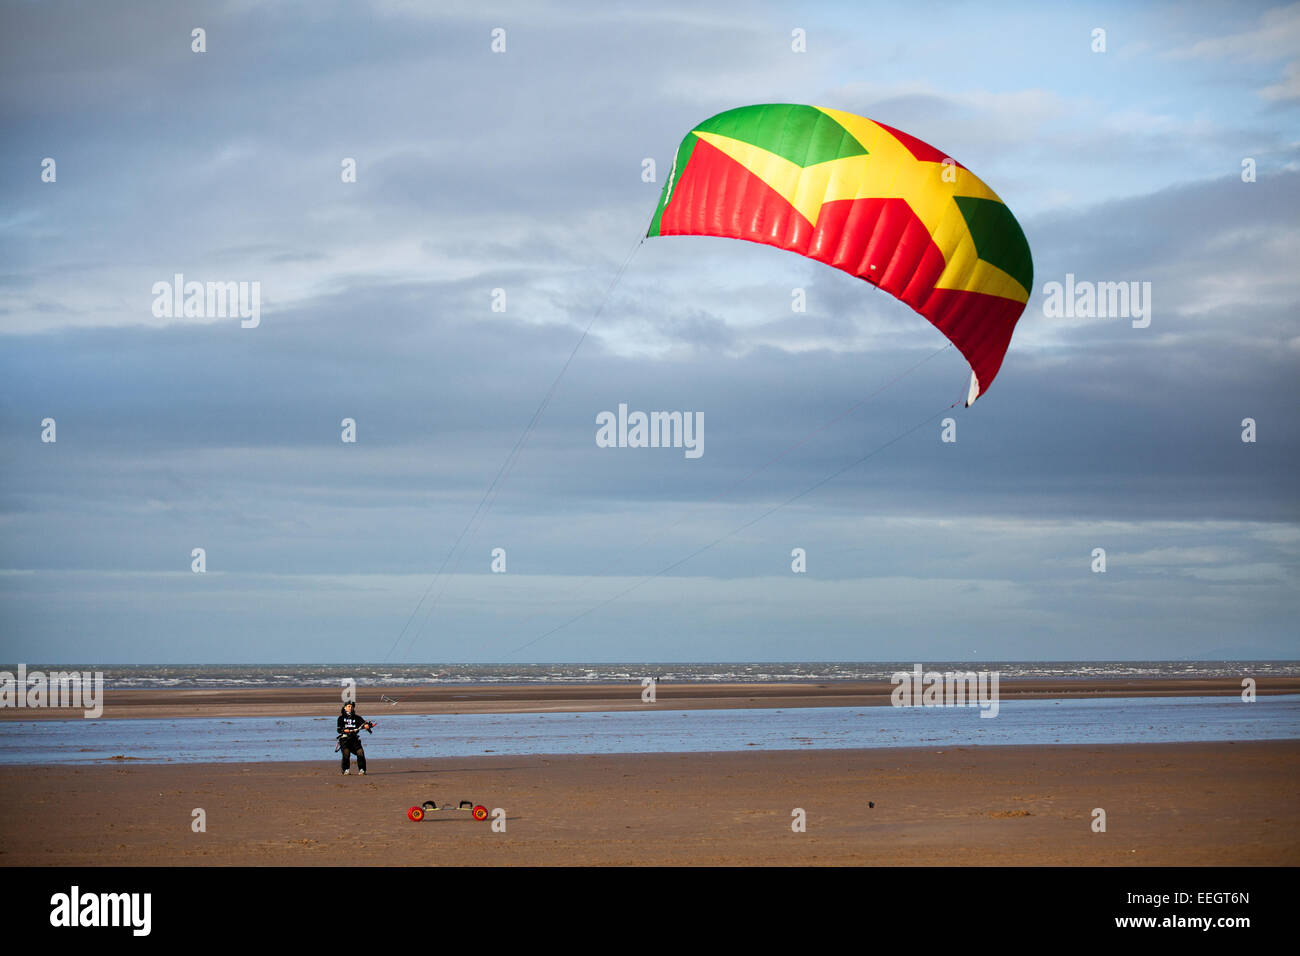 Southport, Merseyside, UK. 18th Jan, 2015. Carl Kirton, from Preston landboarding at his favourite spot on Ainsdale beach in stiff northerly winds, on the north-west coast. Carl is the team rider for Peter Lynn Kiteboarding in Preston, and won 2nd & 3rd in various disciplines in the final round of the British Championships on the 12th-14th of September 2014 held in North Devon. Credit:  Mar Photographics/Alamy Live News Stock Photo